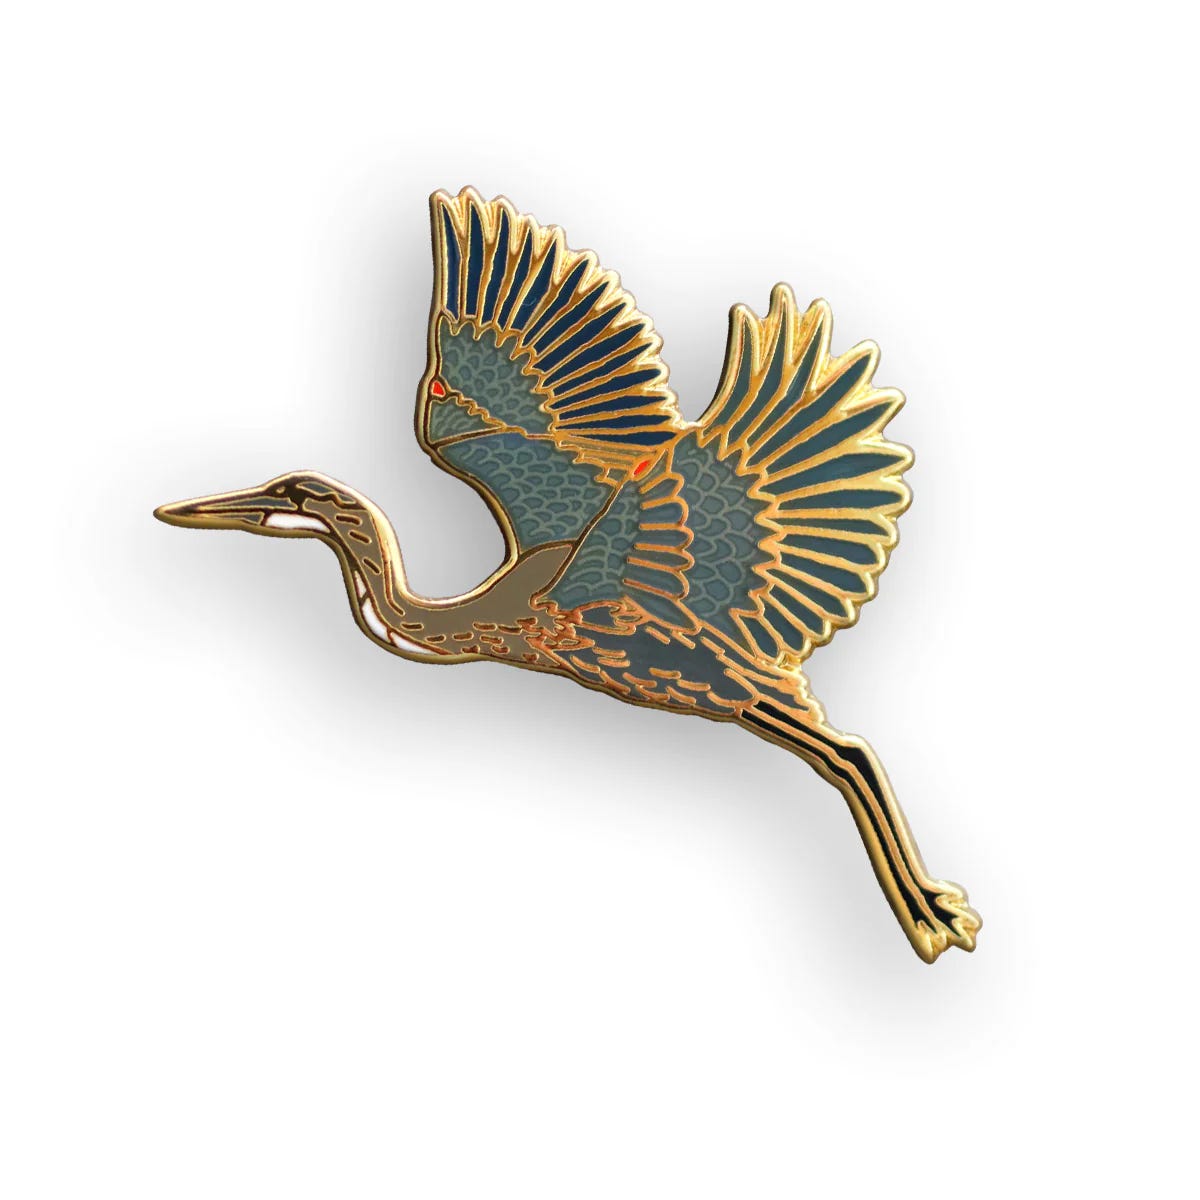 A gold metal pin badge in the shape of a blue heron bird with feathering detail in colour ink.